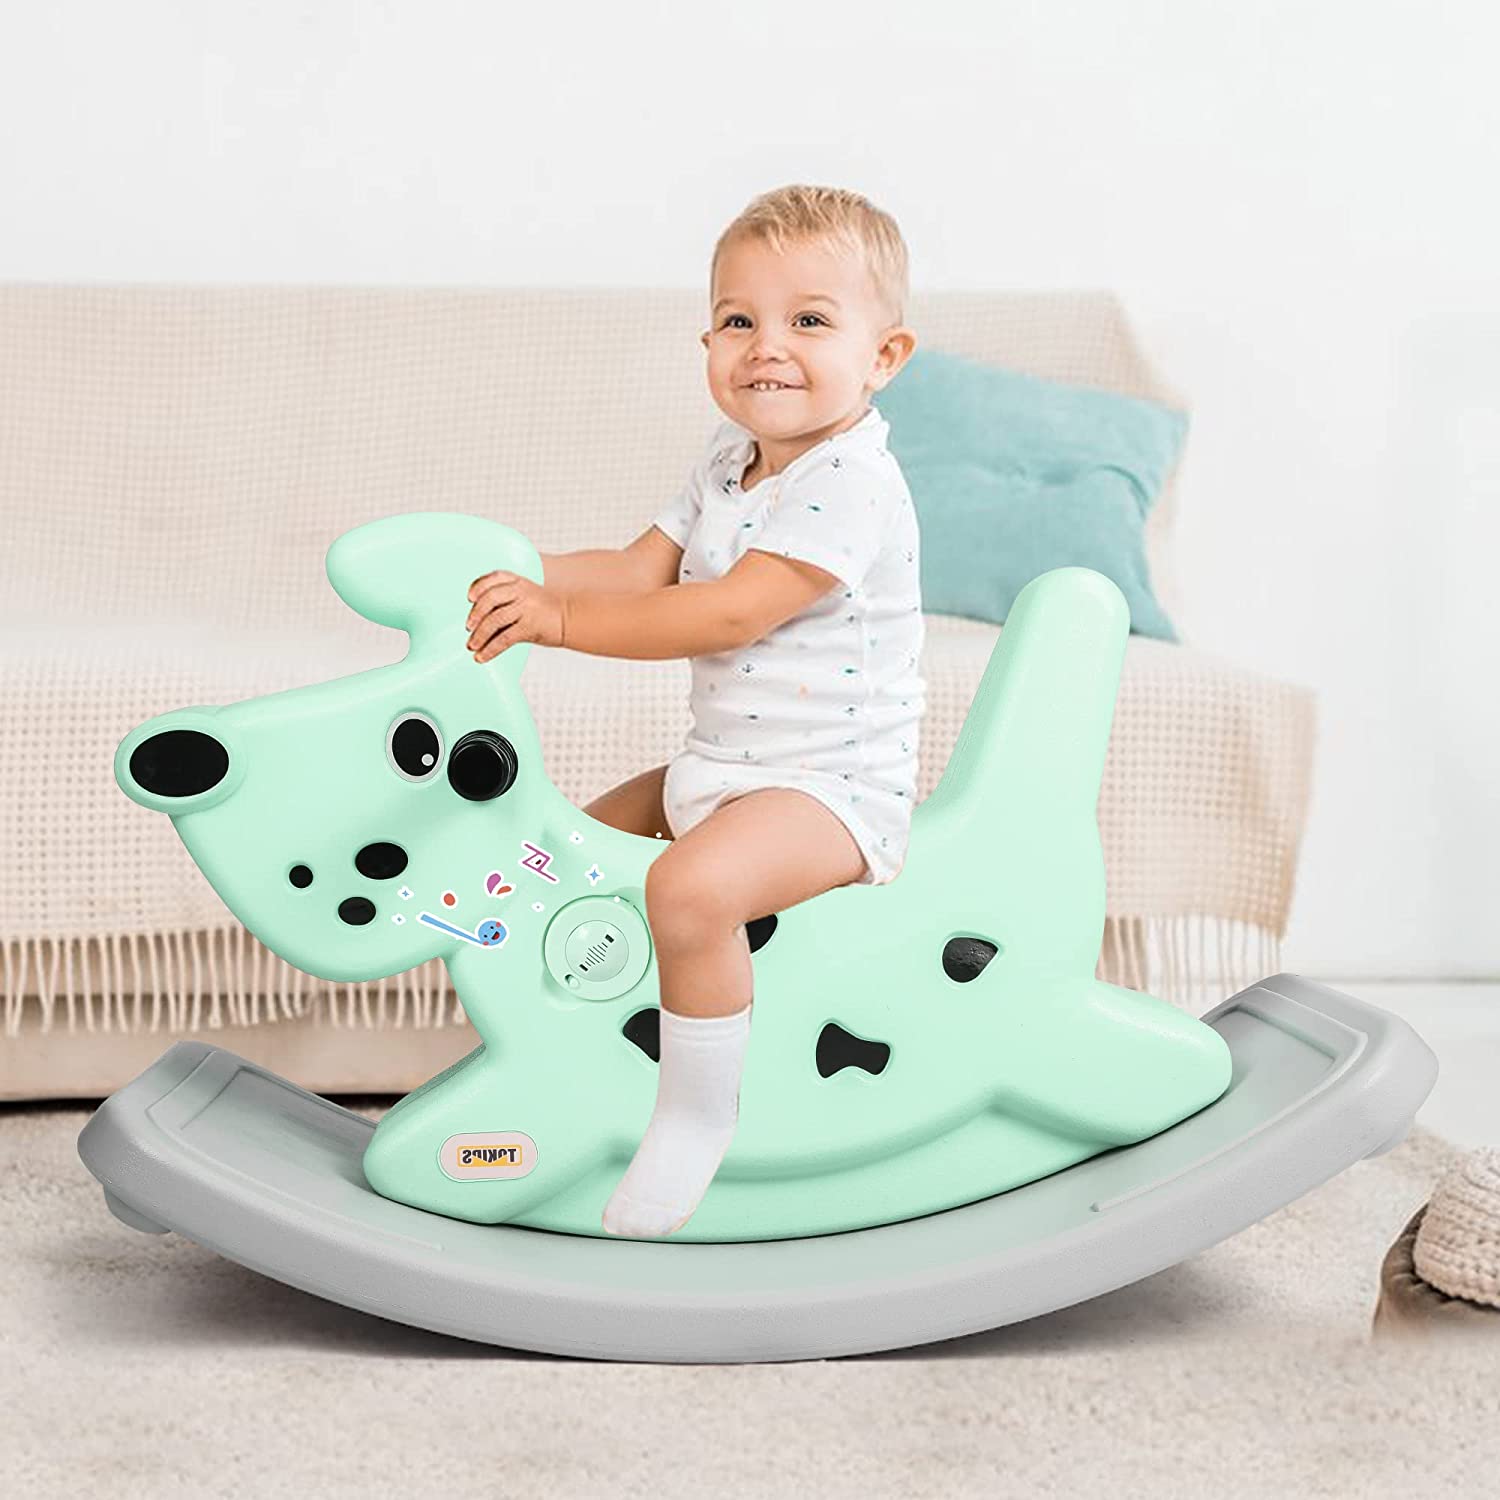 (Out of Stock) Rocking Horse Outdoor Rocking Toy with Music for Toddler Baby Kids Ages 1-3 Year Old Boy Girl Green